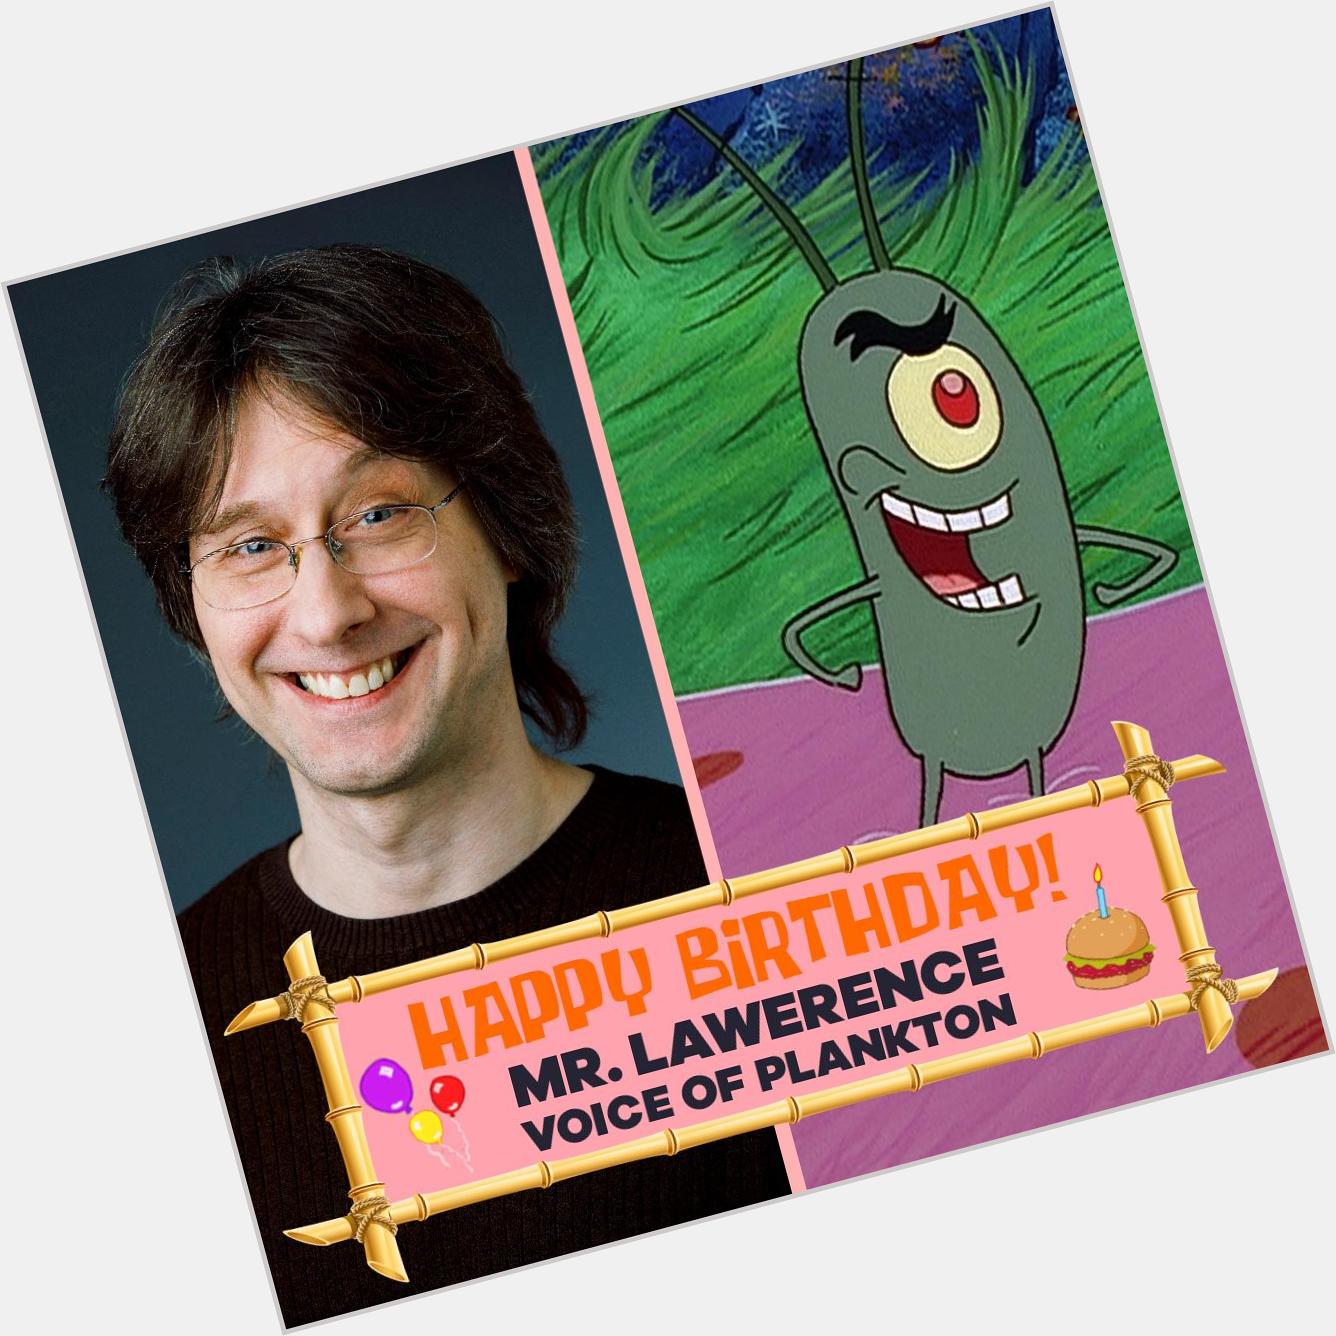 Happy Birthday to the voice of Plankton, Mr. Lawrence! 